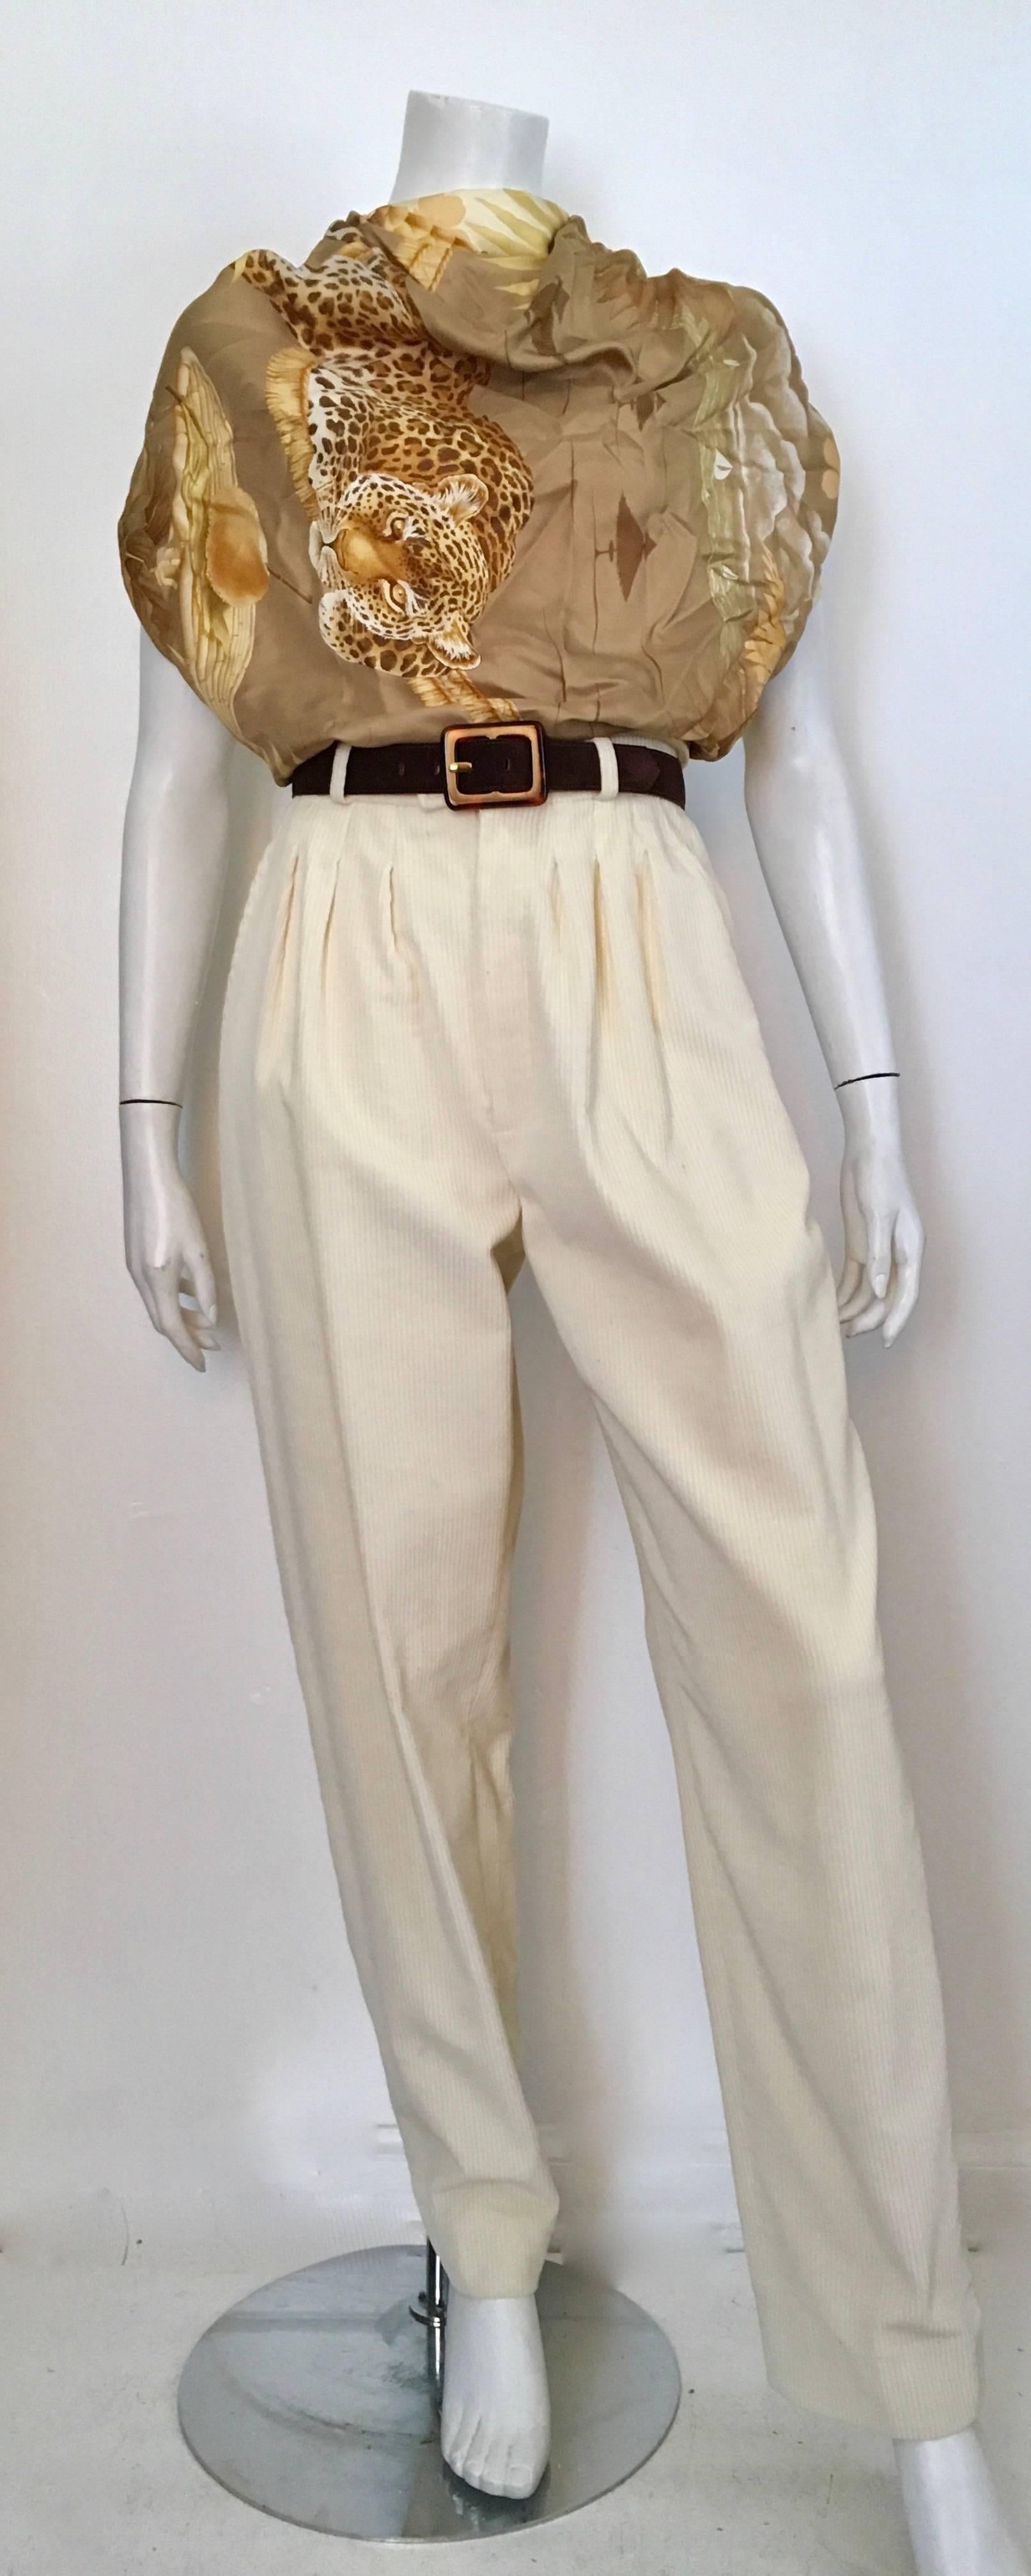 Yves Saint Laurent Rive Gauche 1980s cream corduroy pleated pants with pockets size 4. Classic & timeless YSL pleated pants with many more miles to go.  These pants are just as wearable today as the day they were produced. Wear these corduroy pants